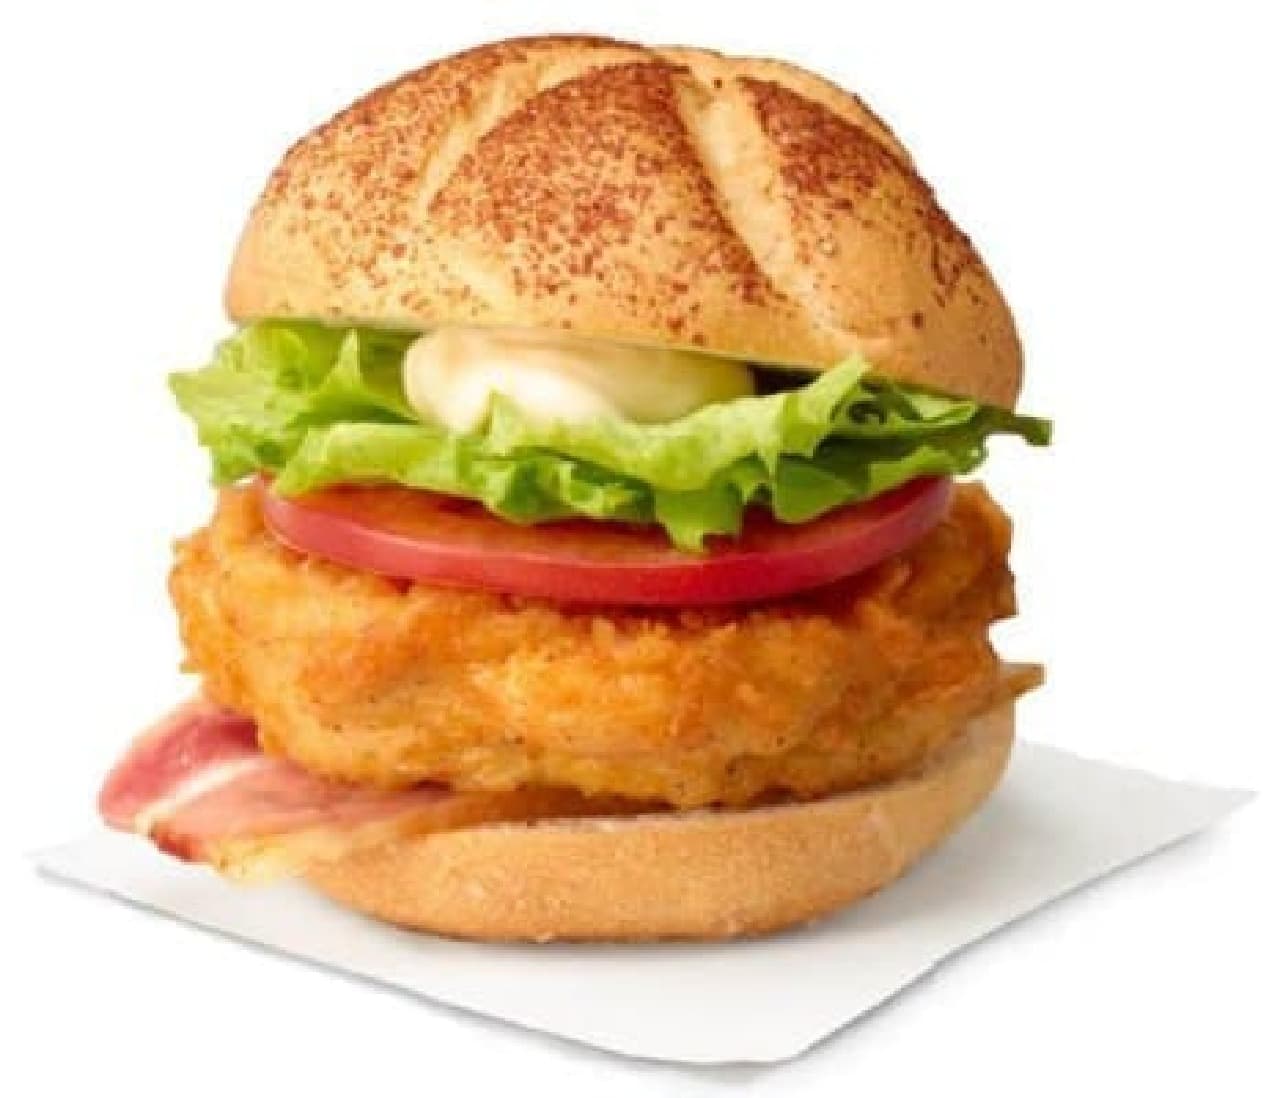 Chicken fillet and bacon combo! "Premium fillet sandwich"